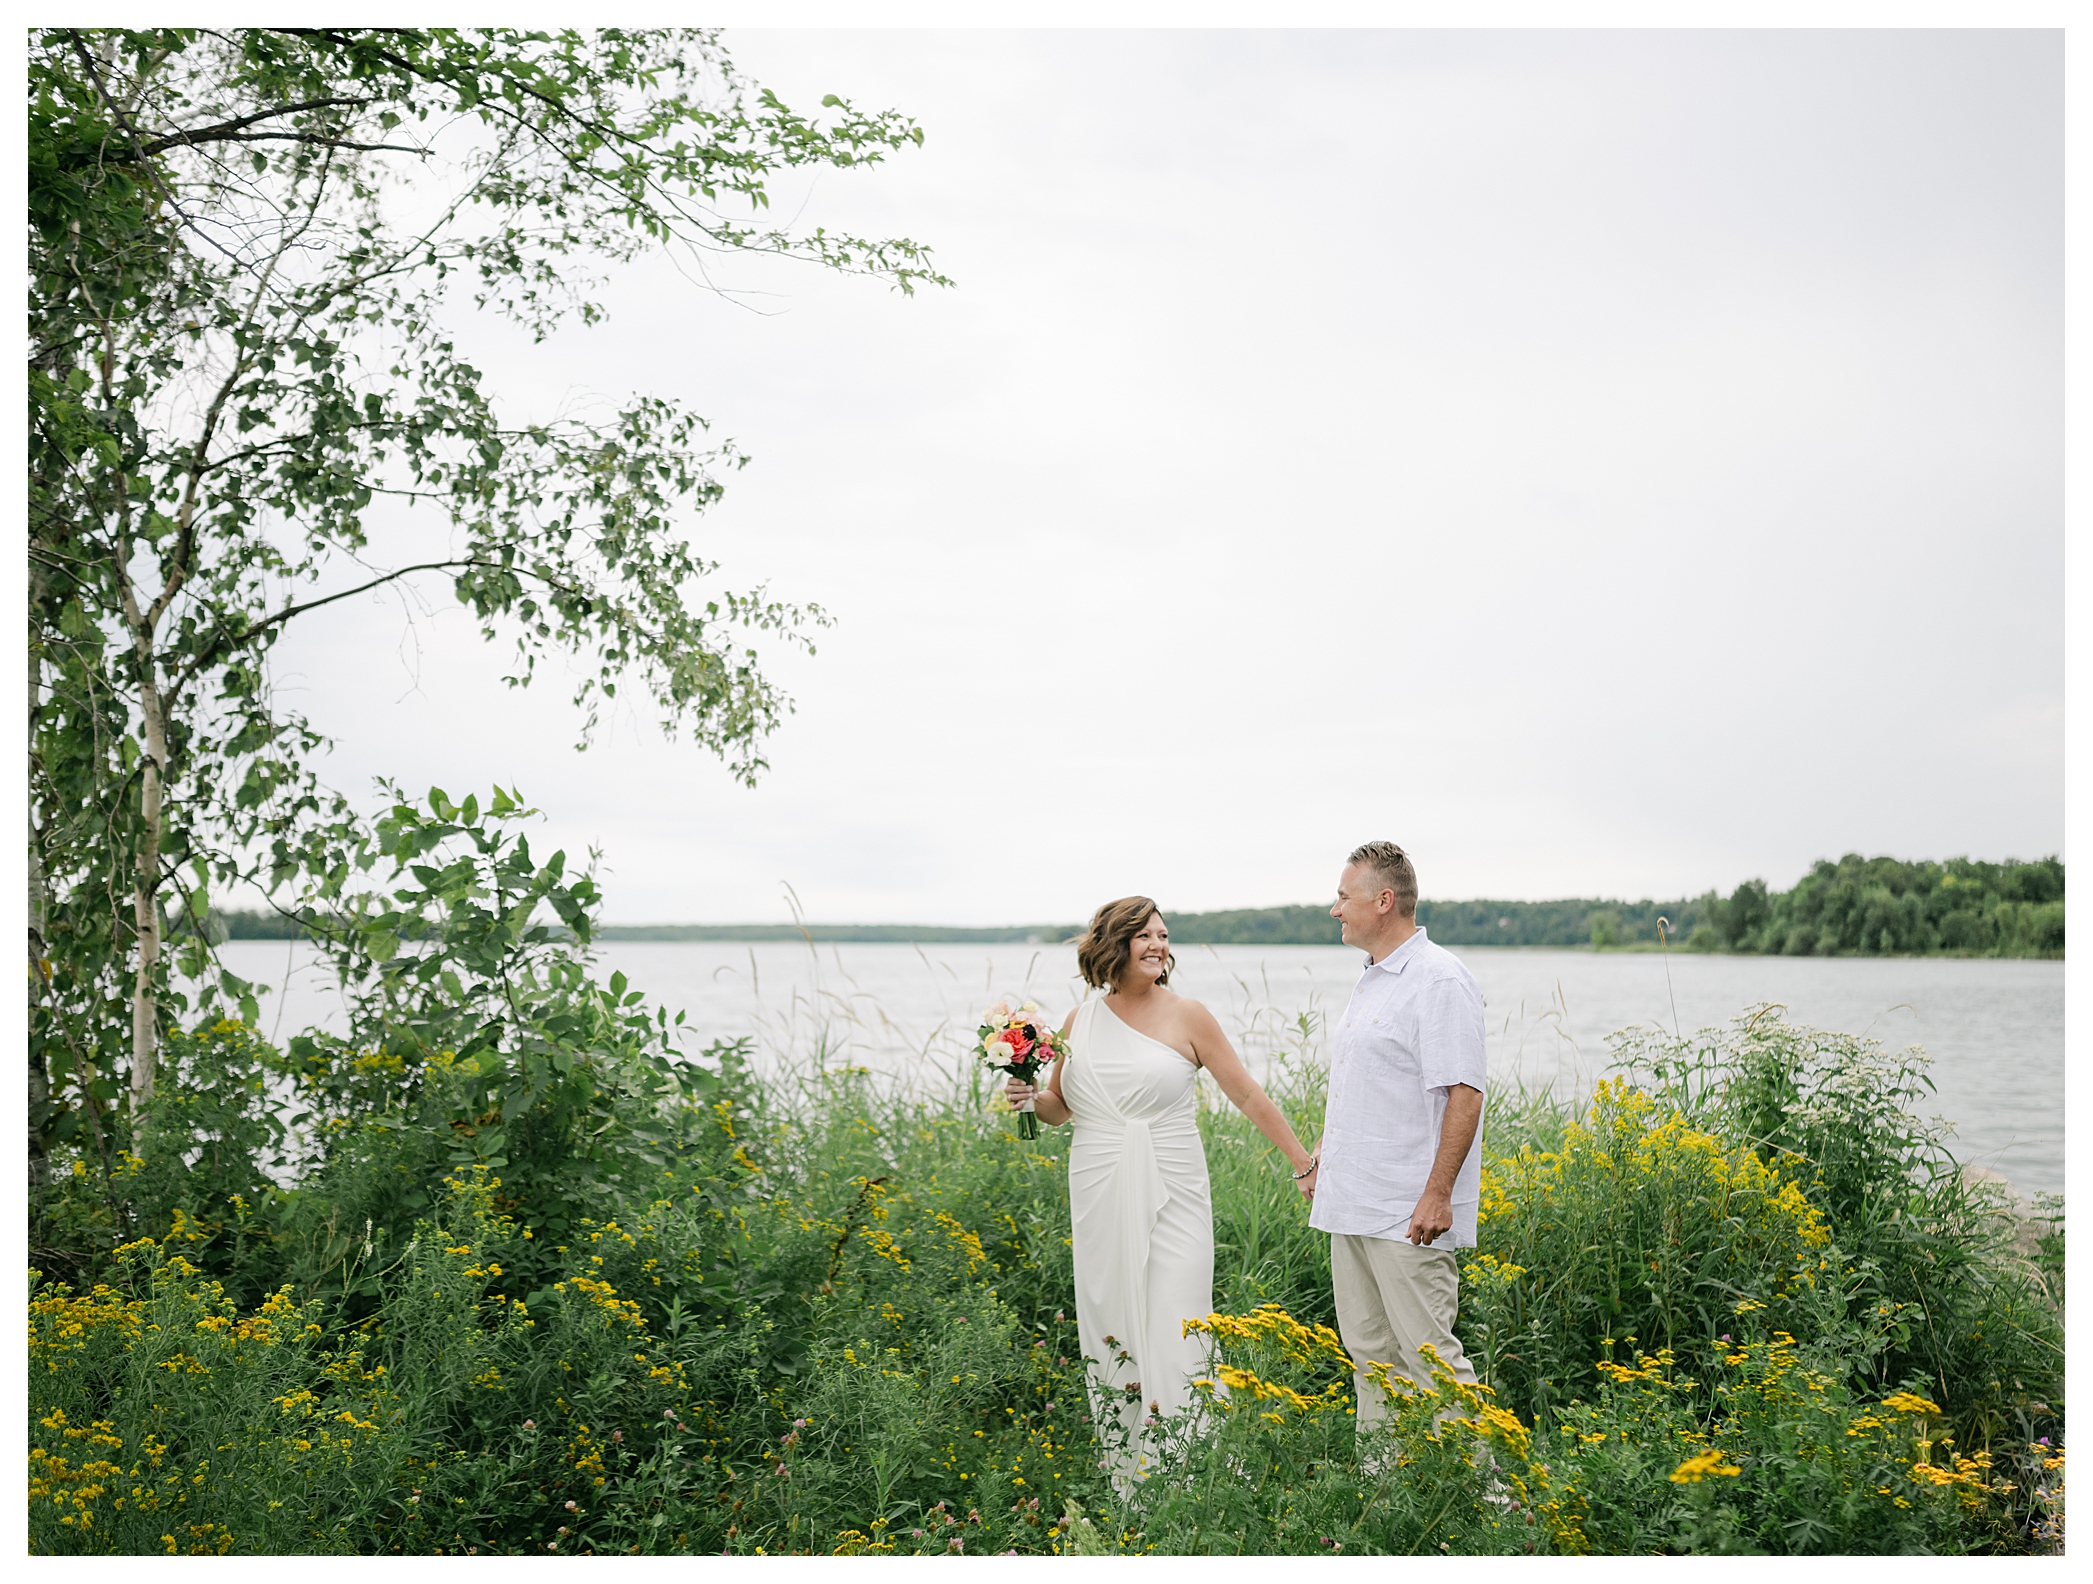 Photo of Vow Renewal at their Lake Residence in Northern MN • Xsperience Pictures